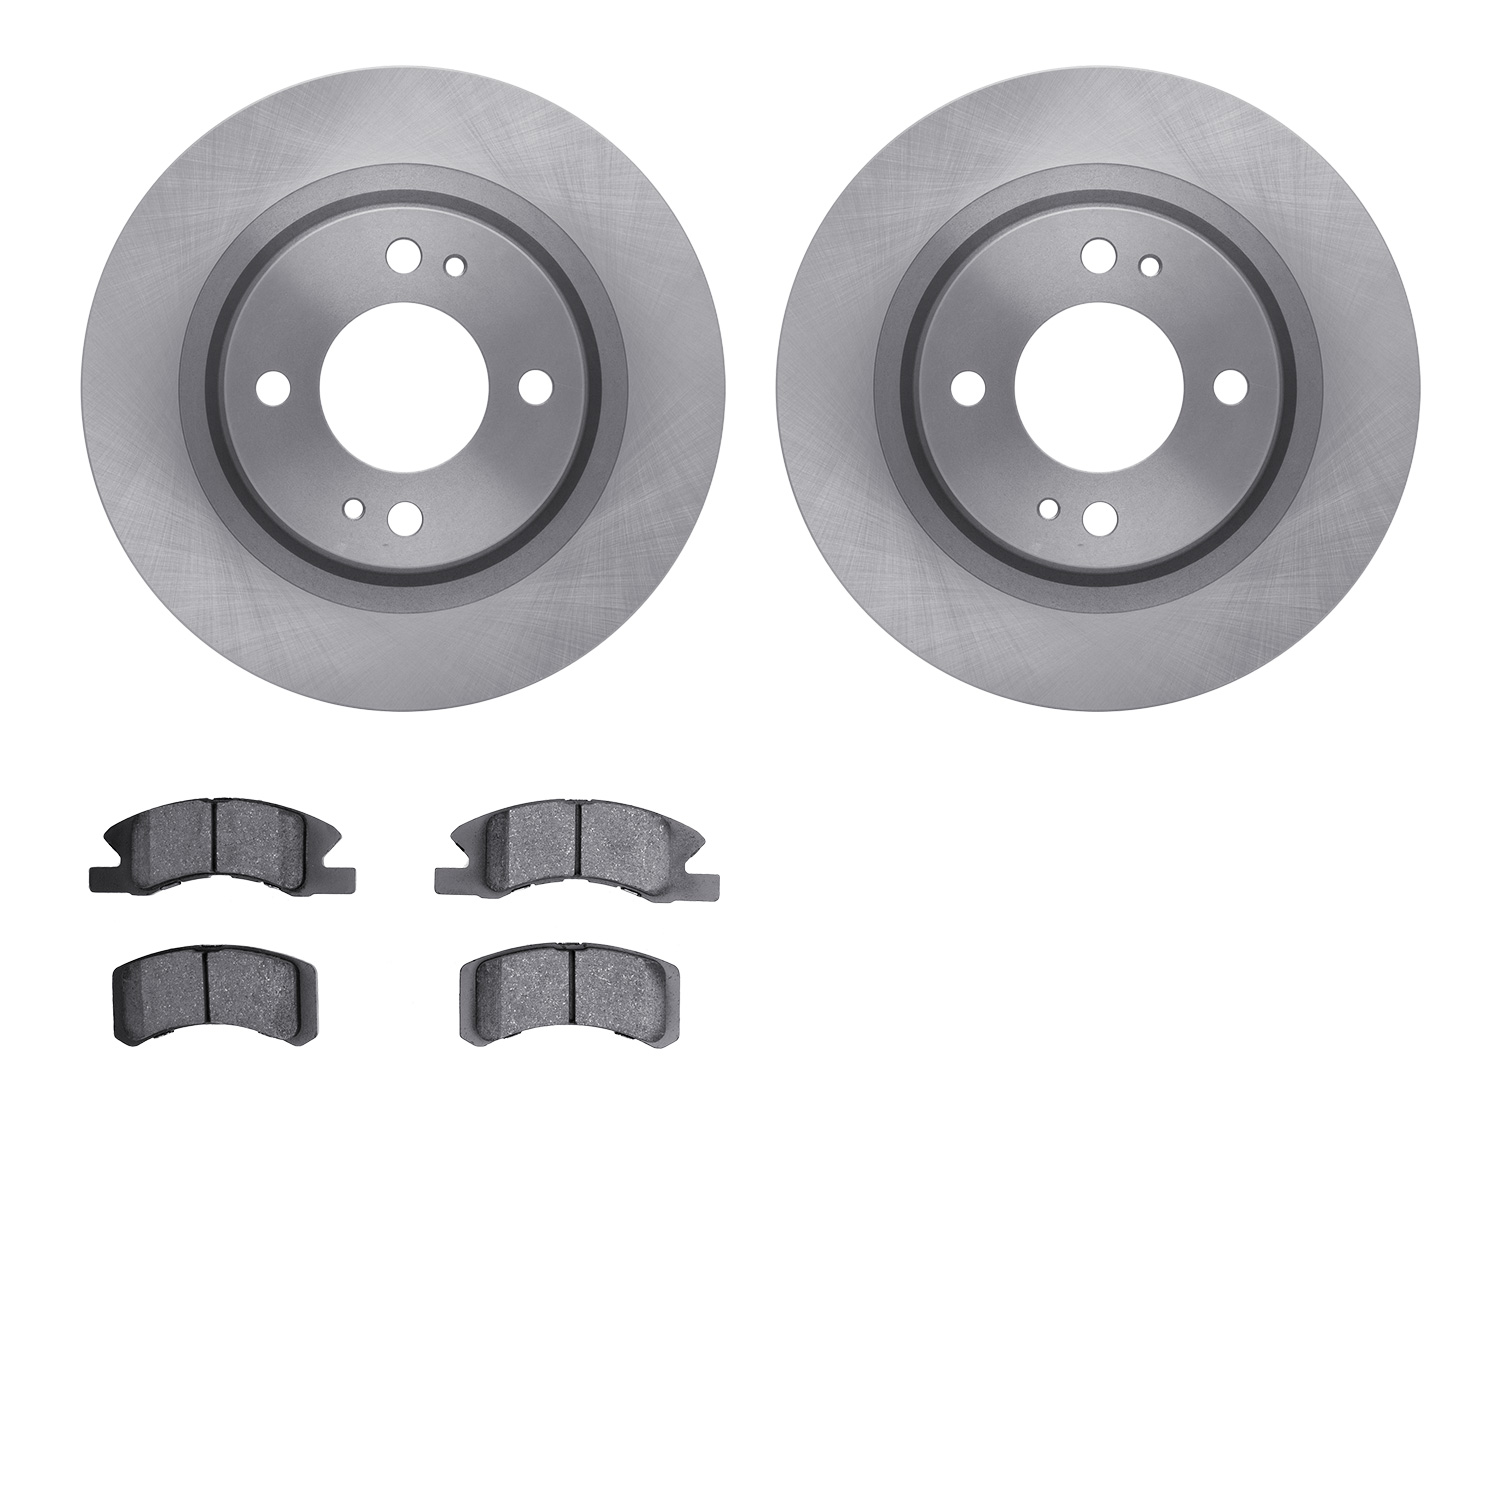 6302-72089 Brake Rotors with 3000-Series Ceramic Brake Pads Kit, Fits Select Multiple Makes/Models, Position: Front